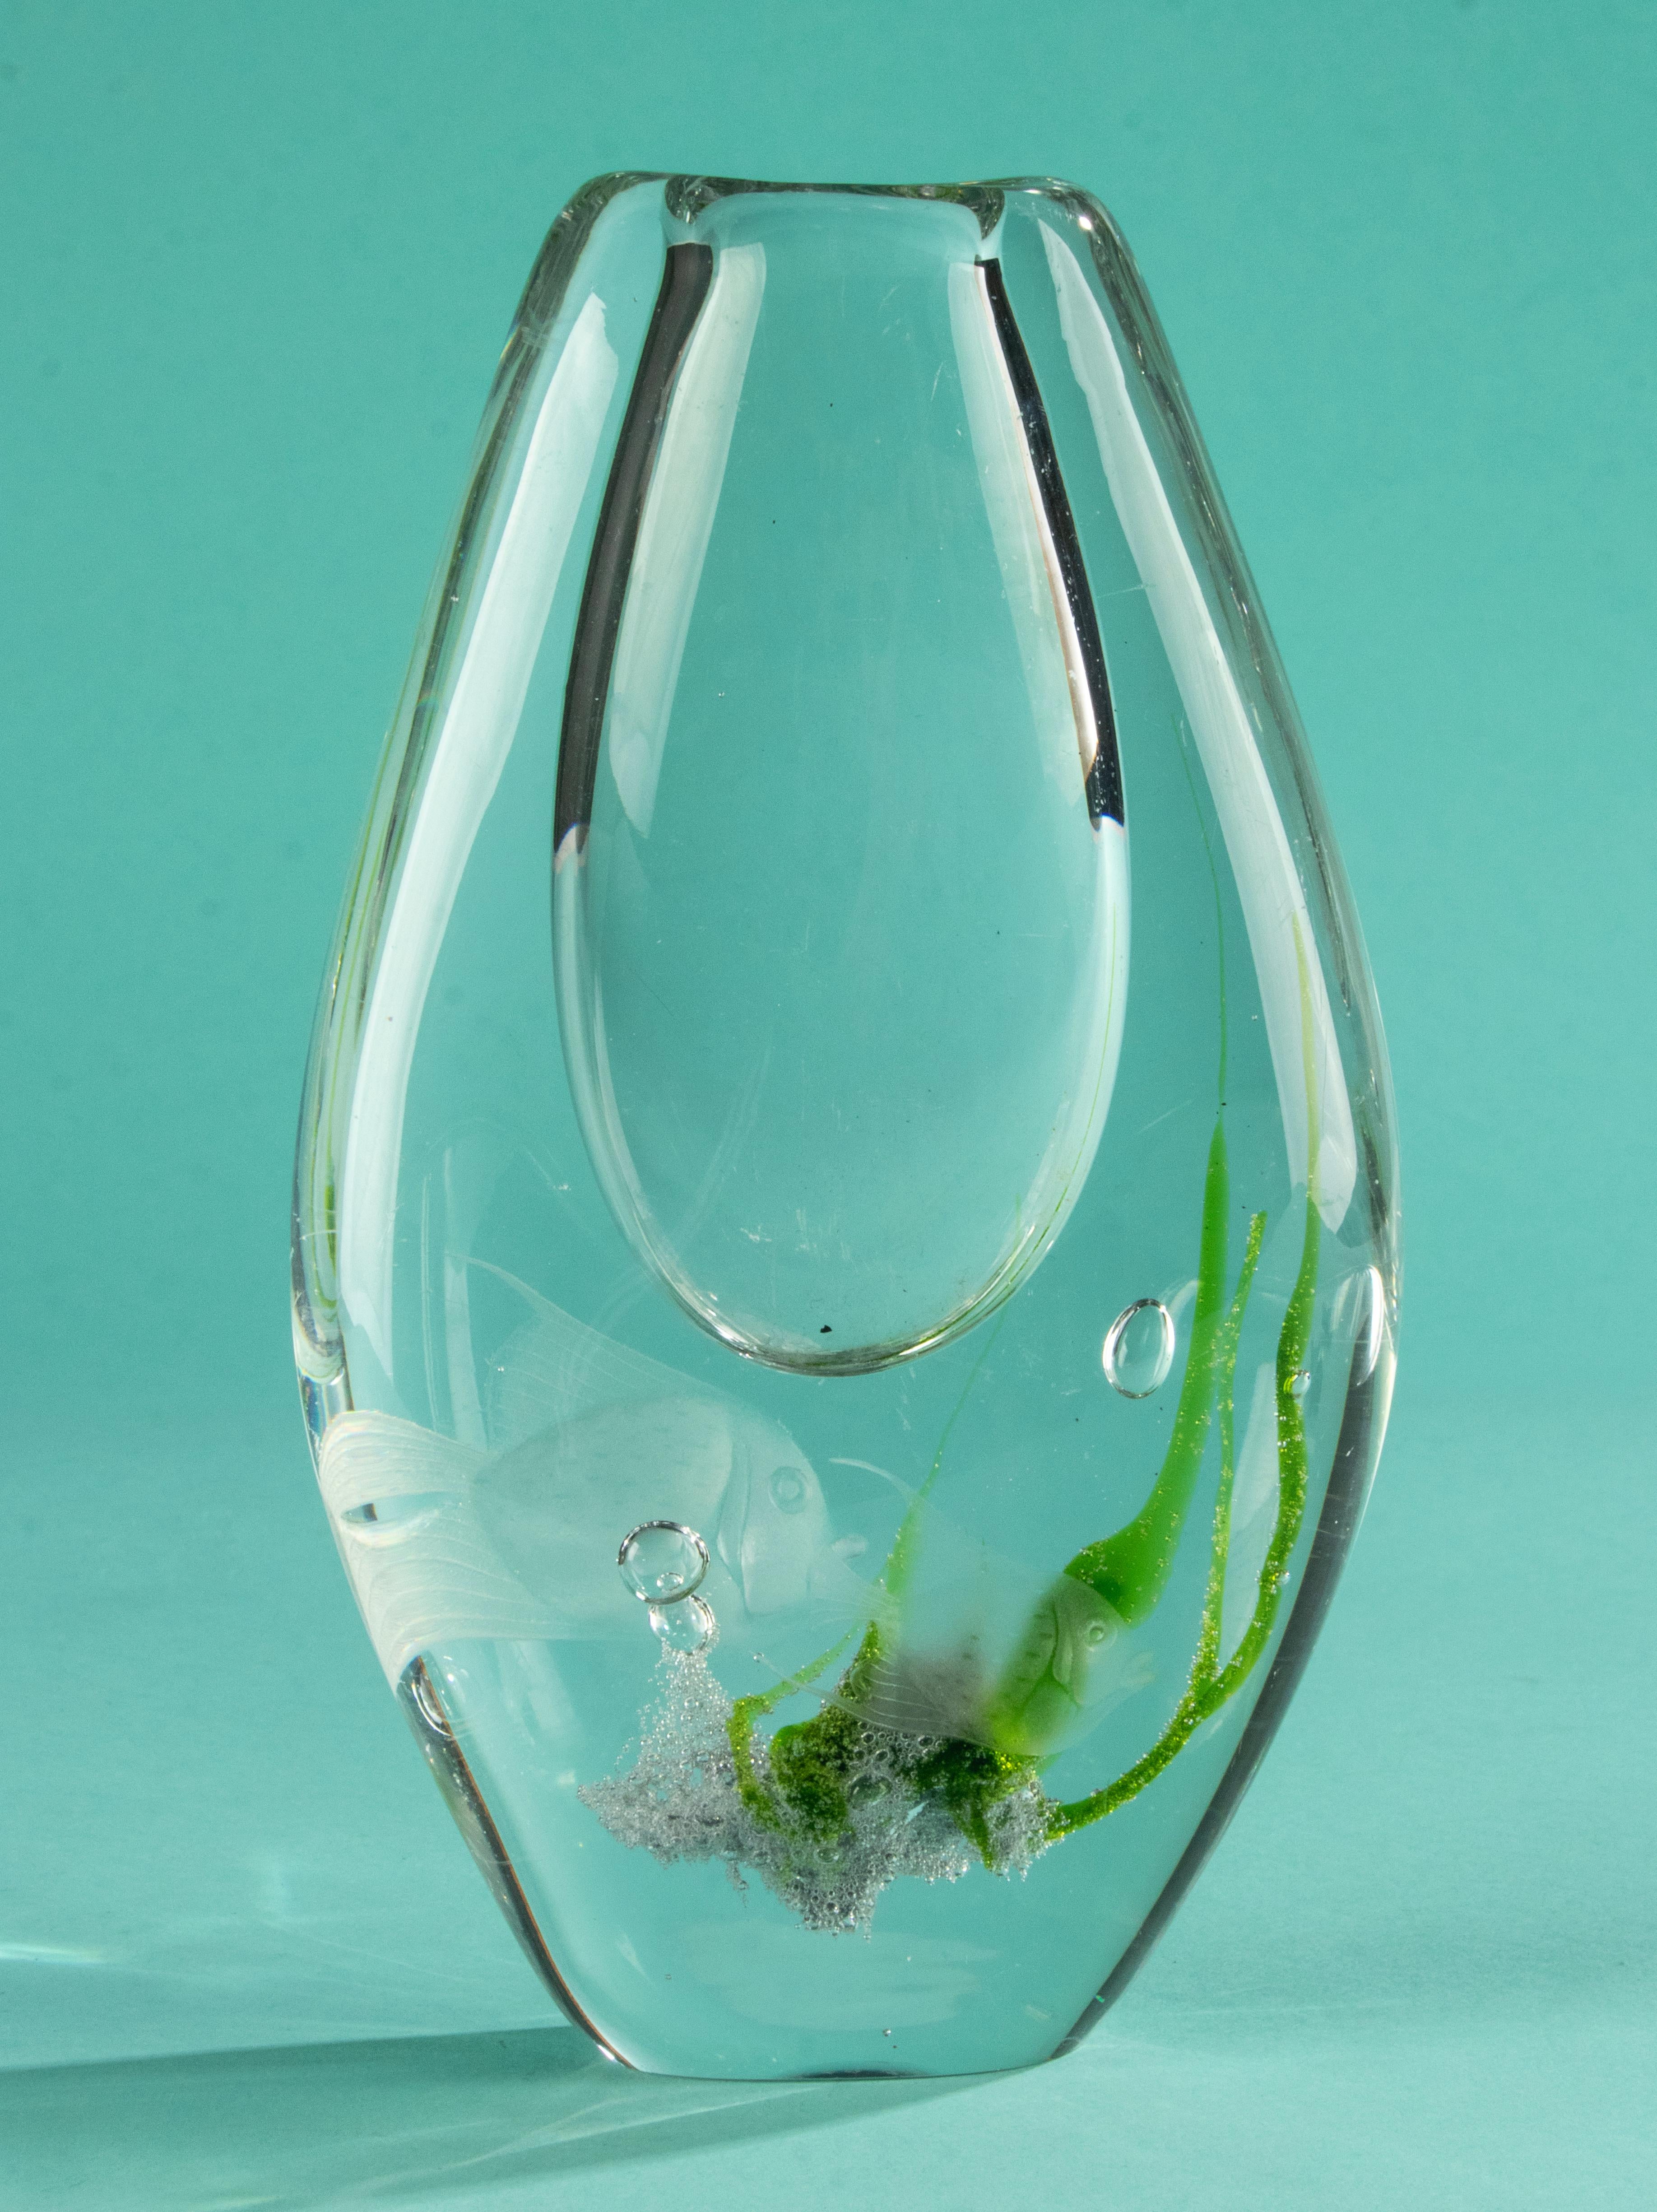 A beautiful art glass vase, made by the Swedish brand Kosta soda, designed by Vicke Lindstrand. 
The vase is made of thick layers glass with clear green inclusions and etched fish on both sides. 
The vase is in good condition. Signed on the bottom.